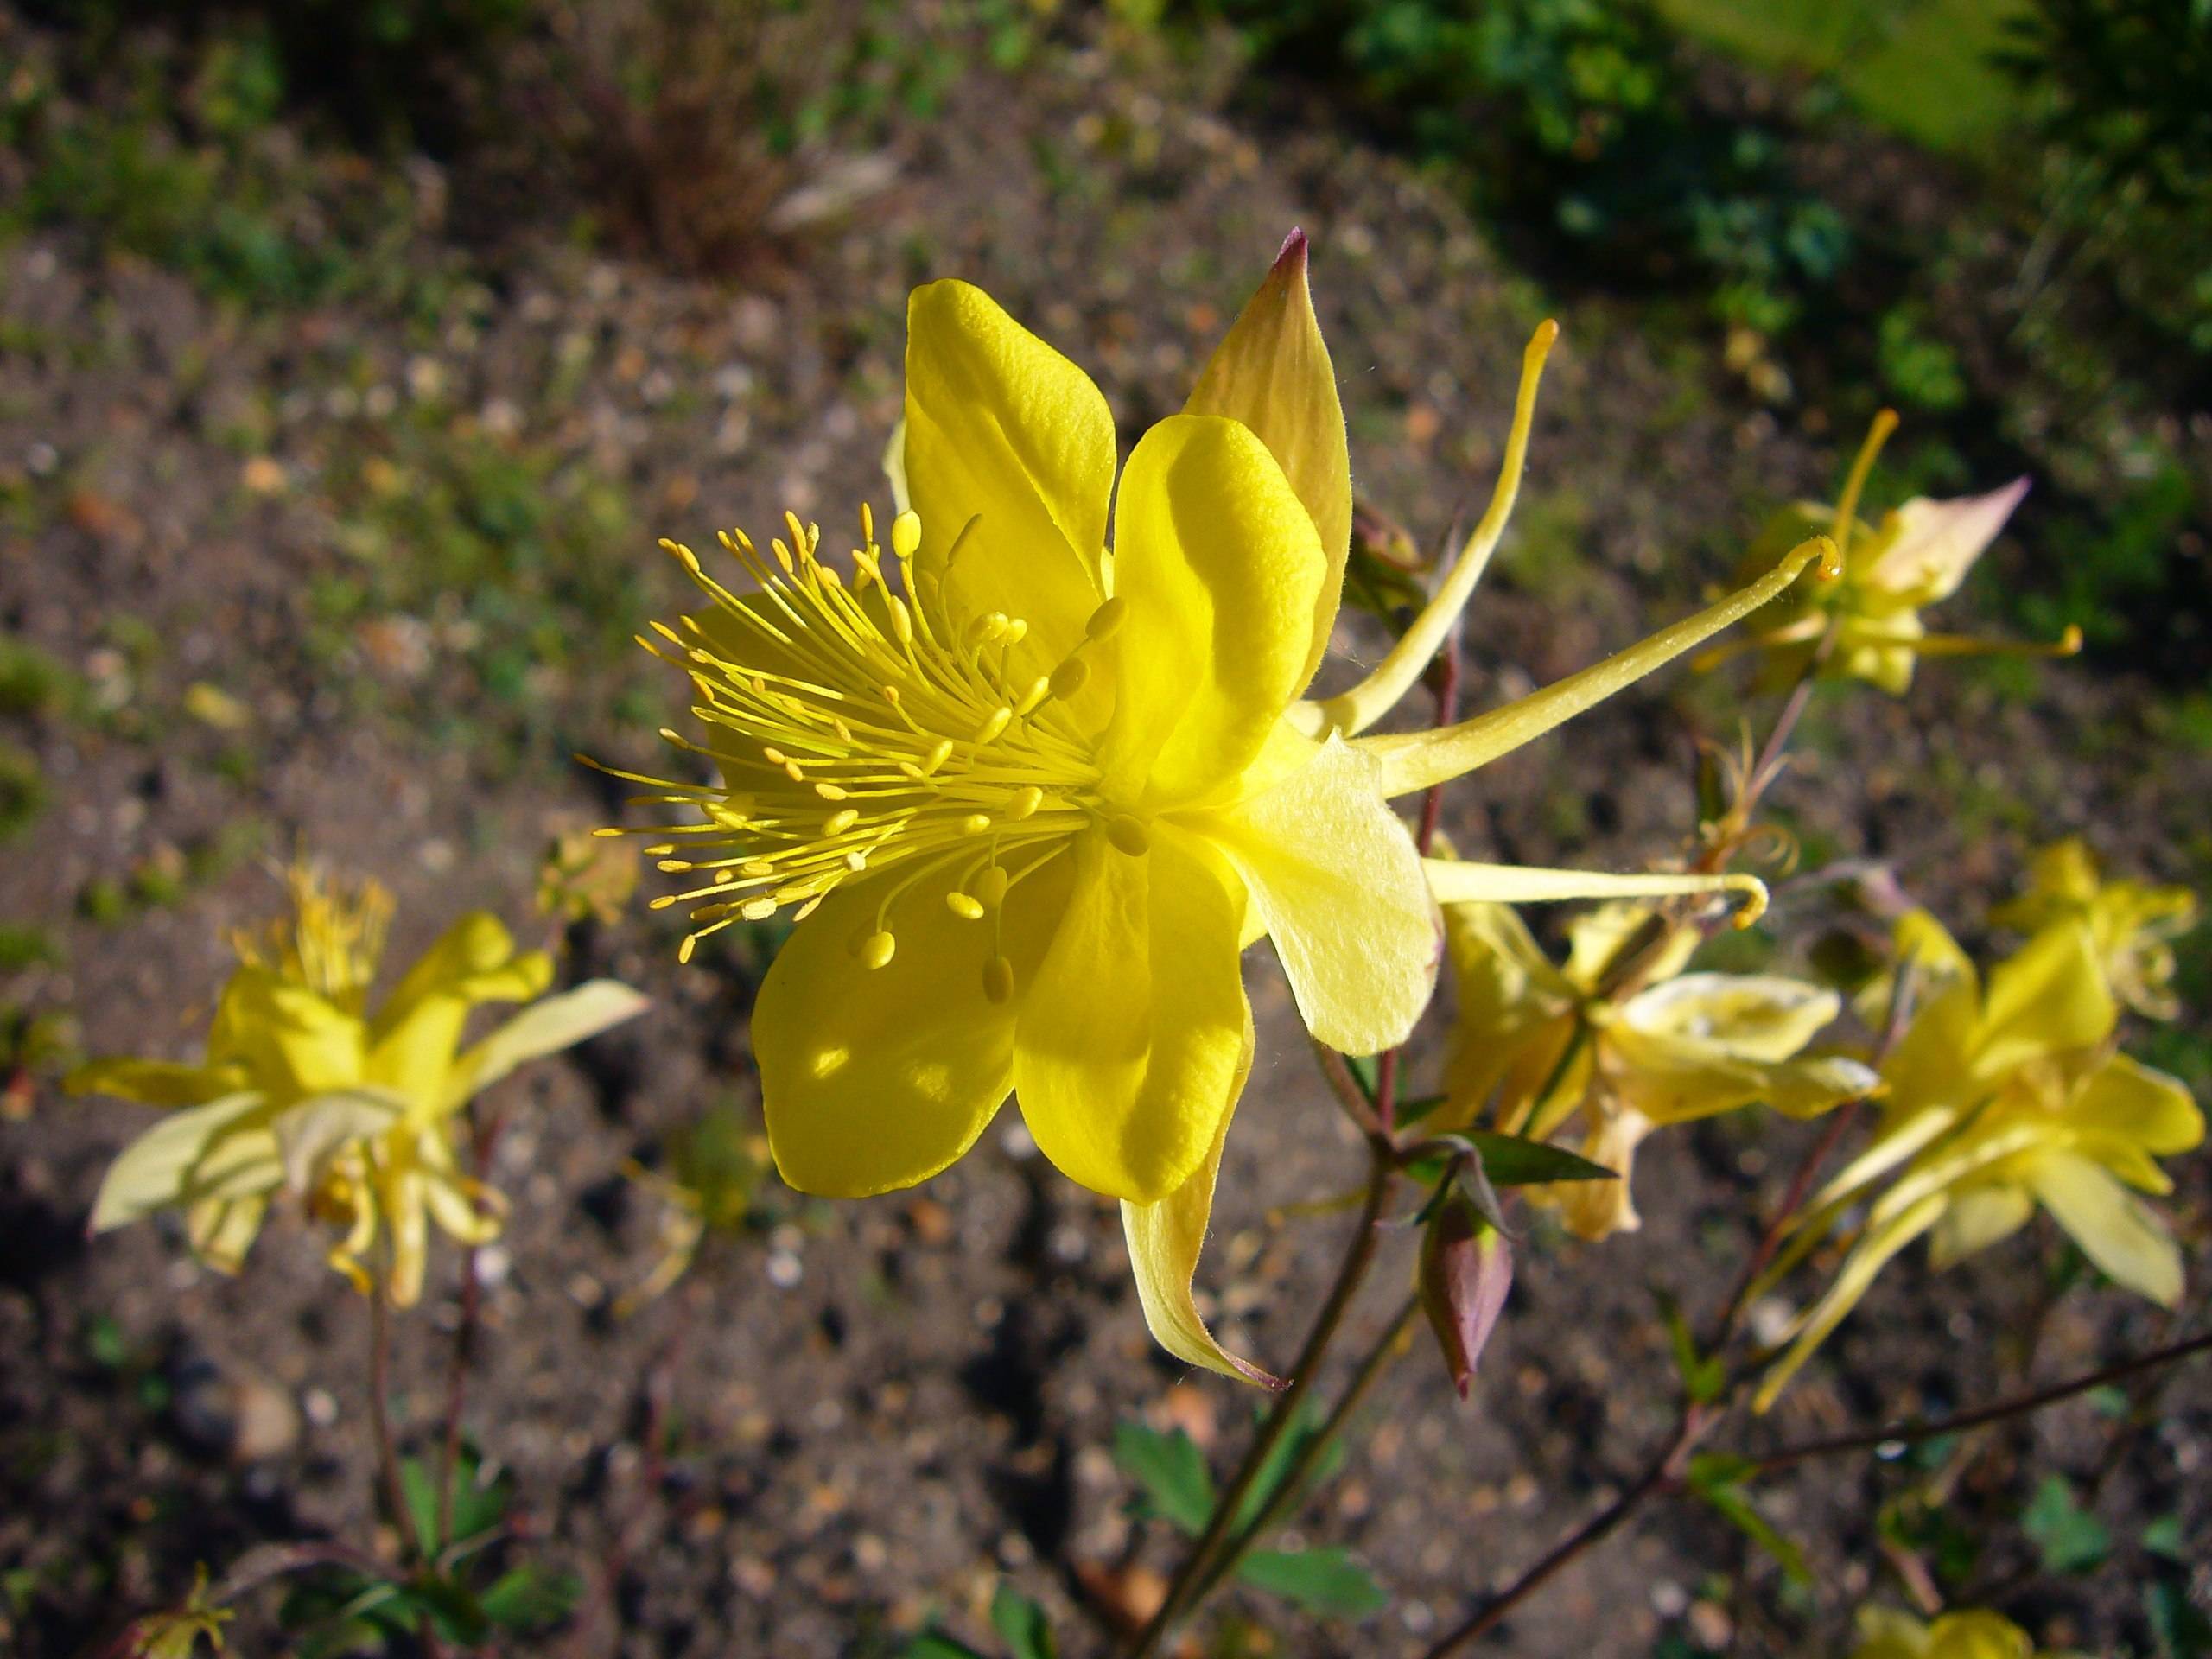 yellow flowers with yellow stamens, green leaves, burgundy buds and stems